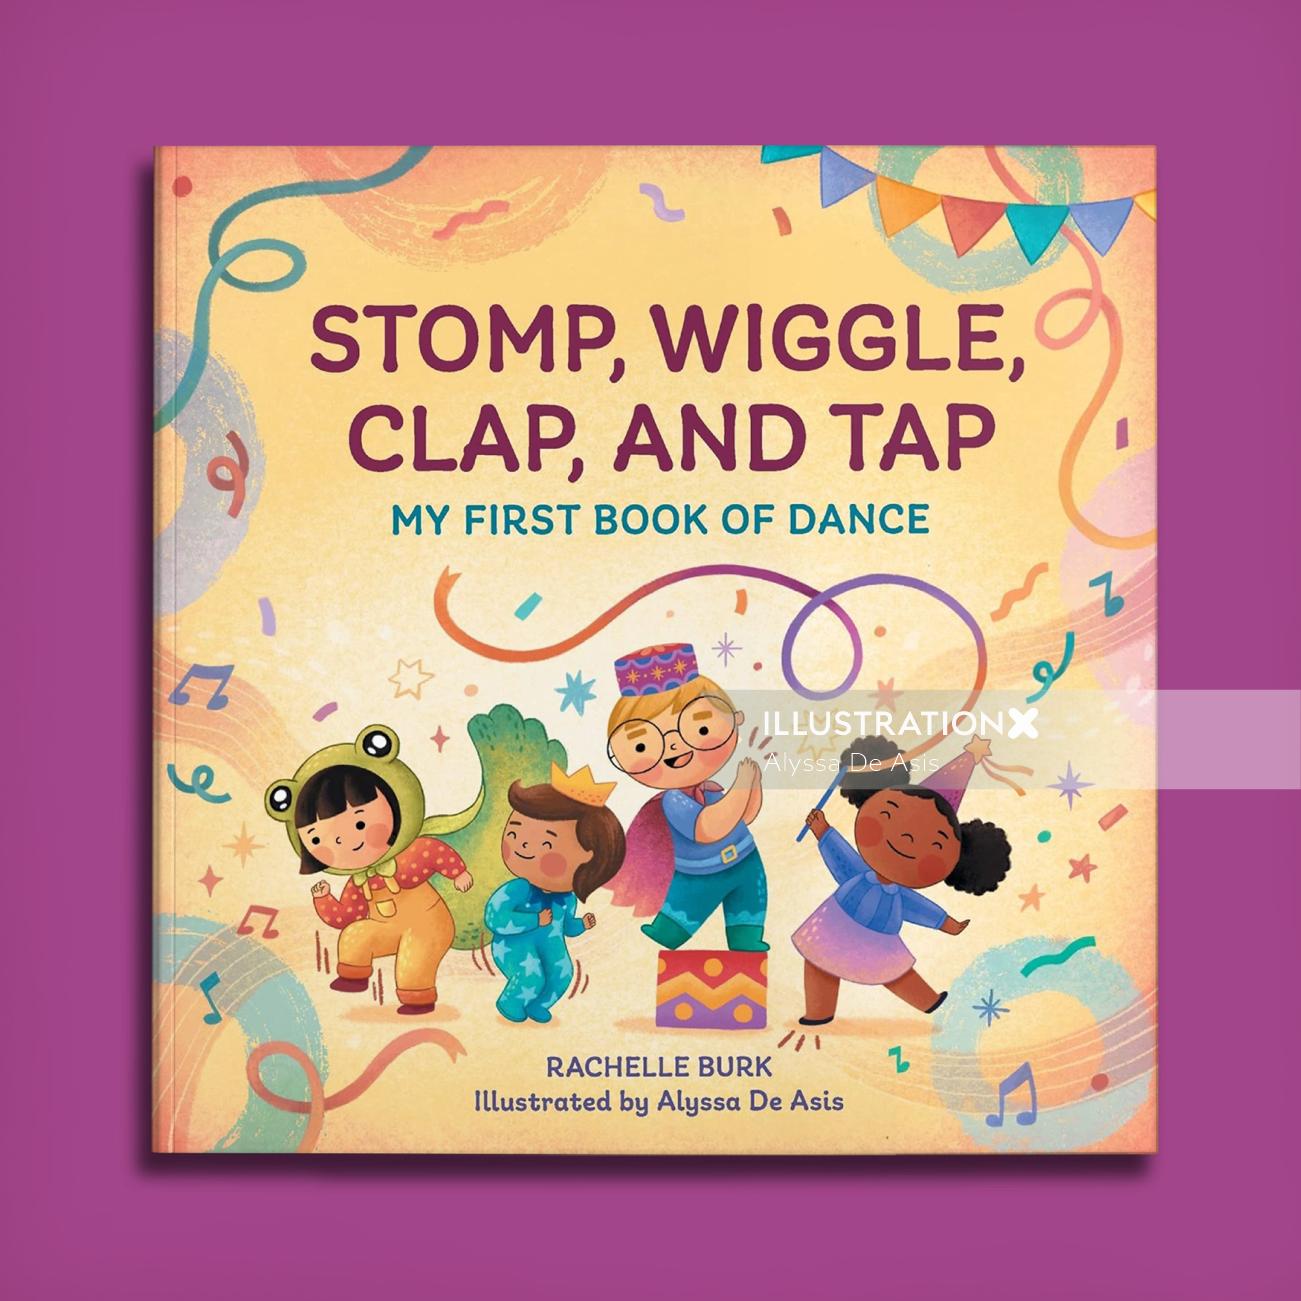 Books Stomp, wiggle, clap and tap
